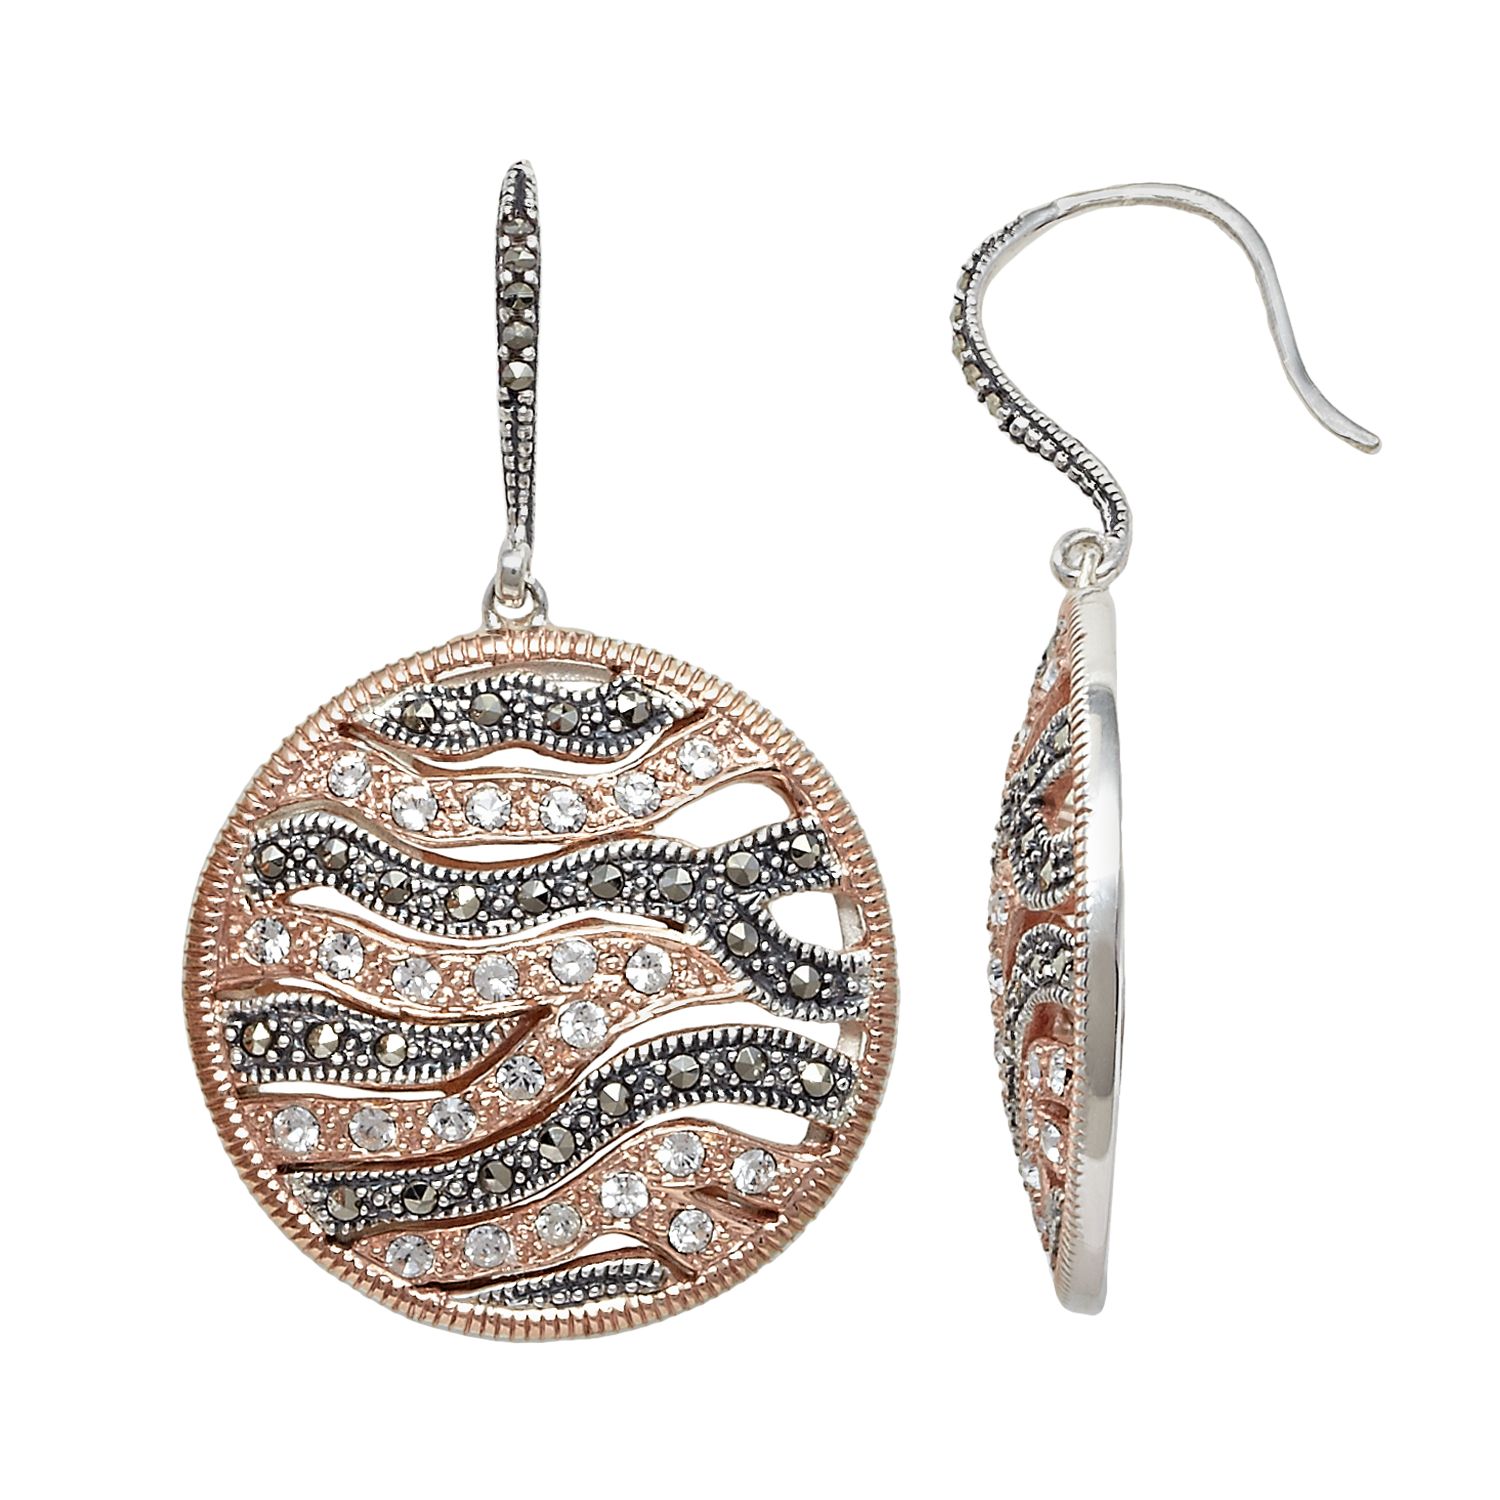 Image for Lavish by TJM Two Tone 18k Rose Gold Over Silver Crystal Wavy Disc Drop Earrings at Kohl's.